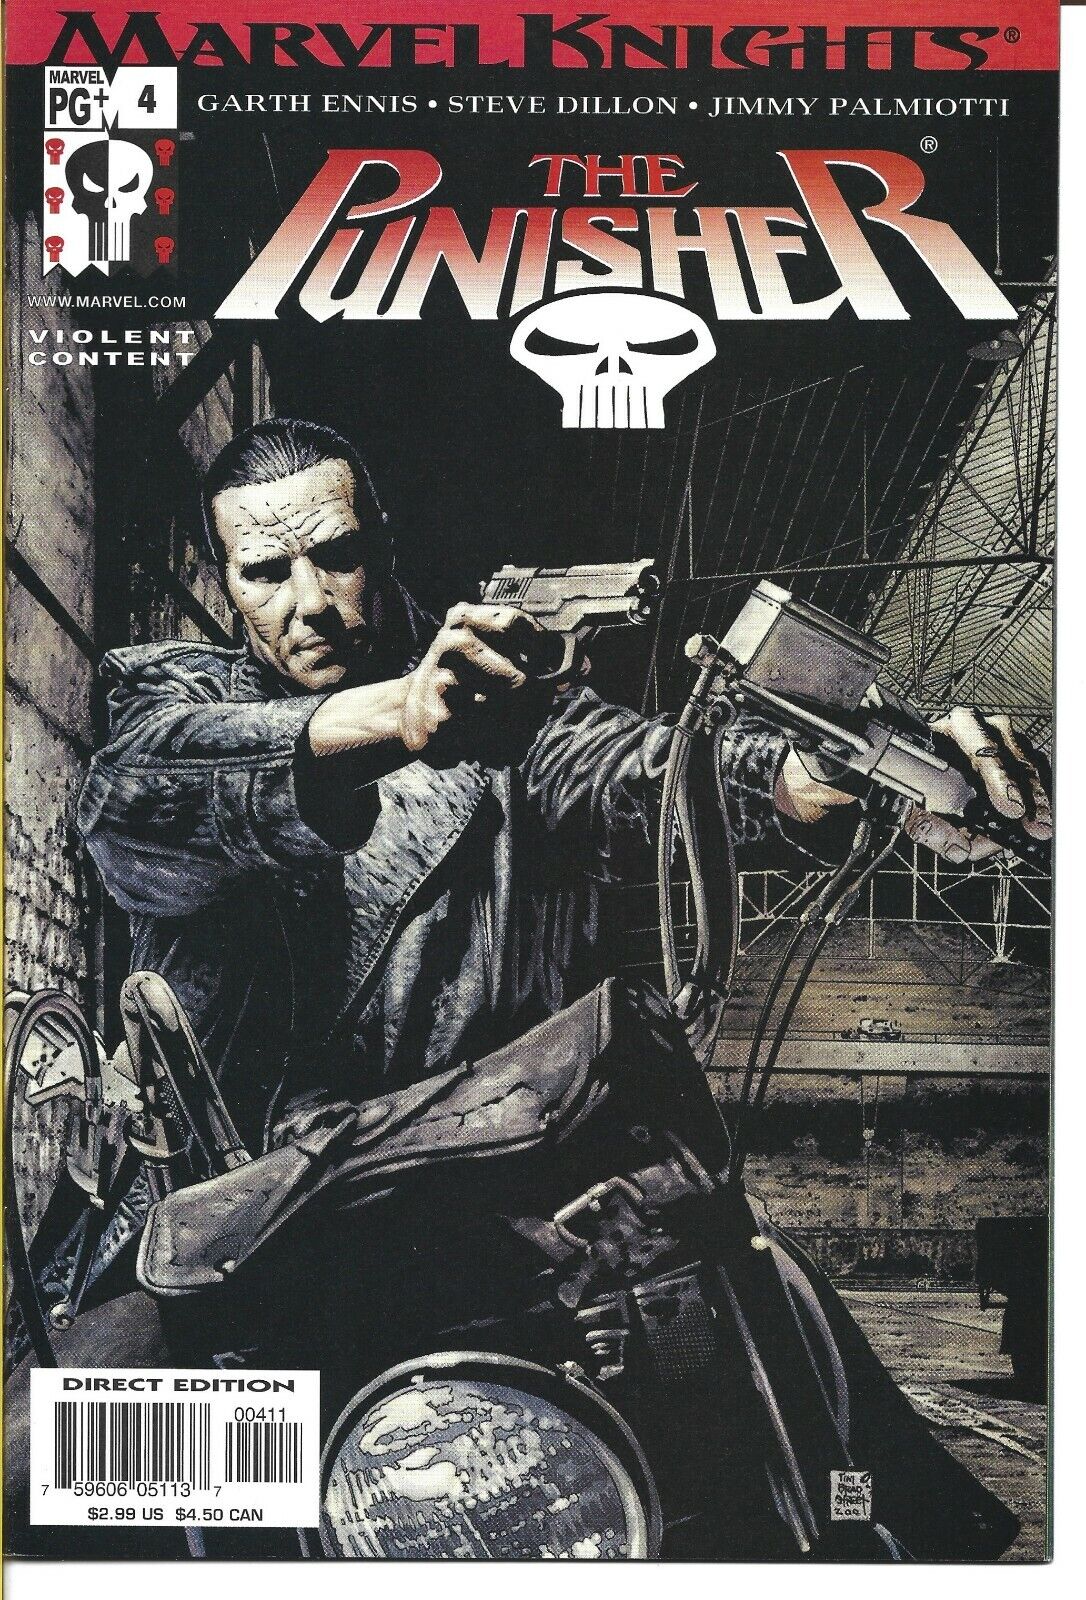 THE PUNISHER #4 MARVEL COMICS 2001 BAGGED AND BOARDED